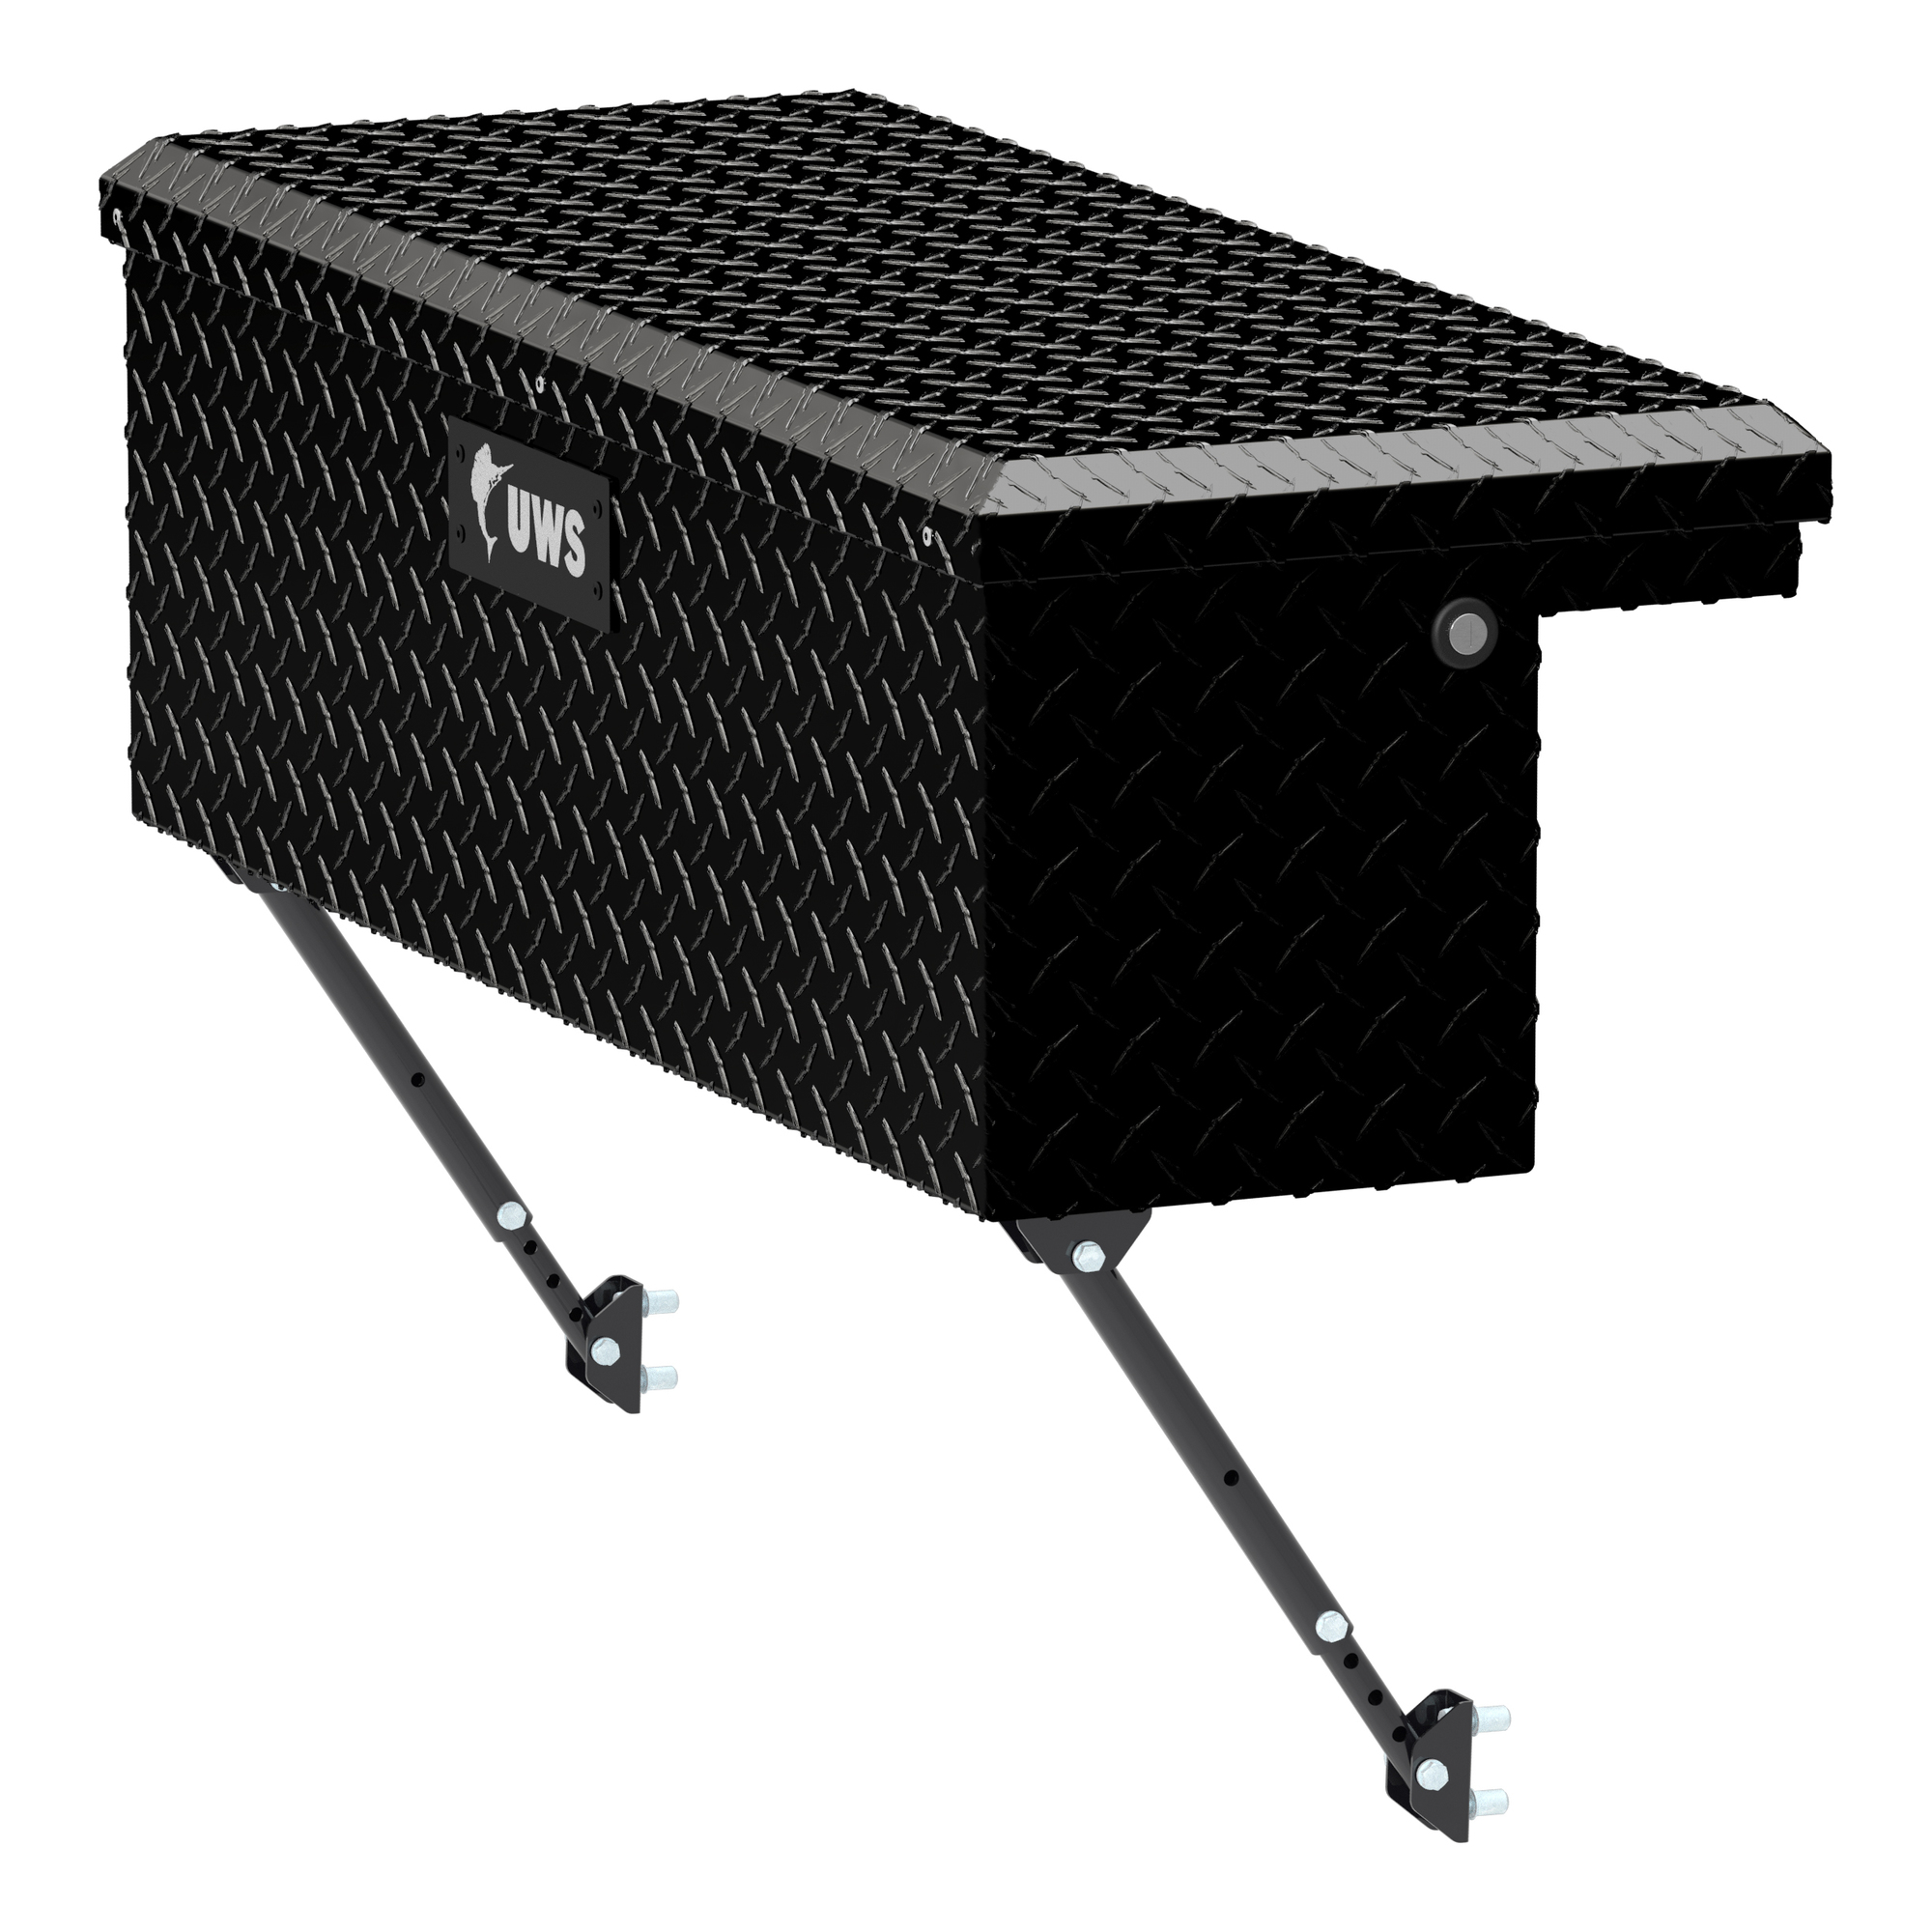 UWS, 36Inch Truck Side Tool Box with Low Profile, Width 36.875 in, Material Aluminum, Color Finish Gloss Black, Model EC30362-MK2